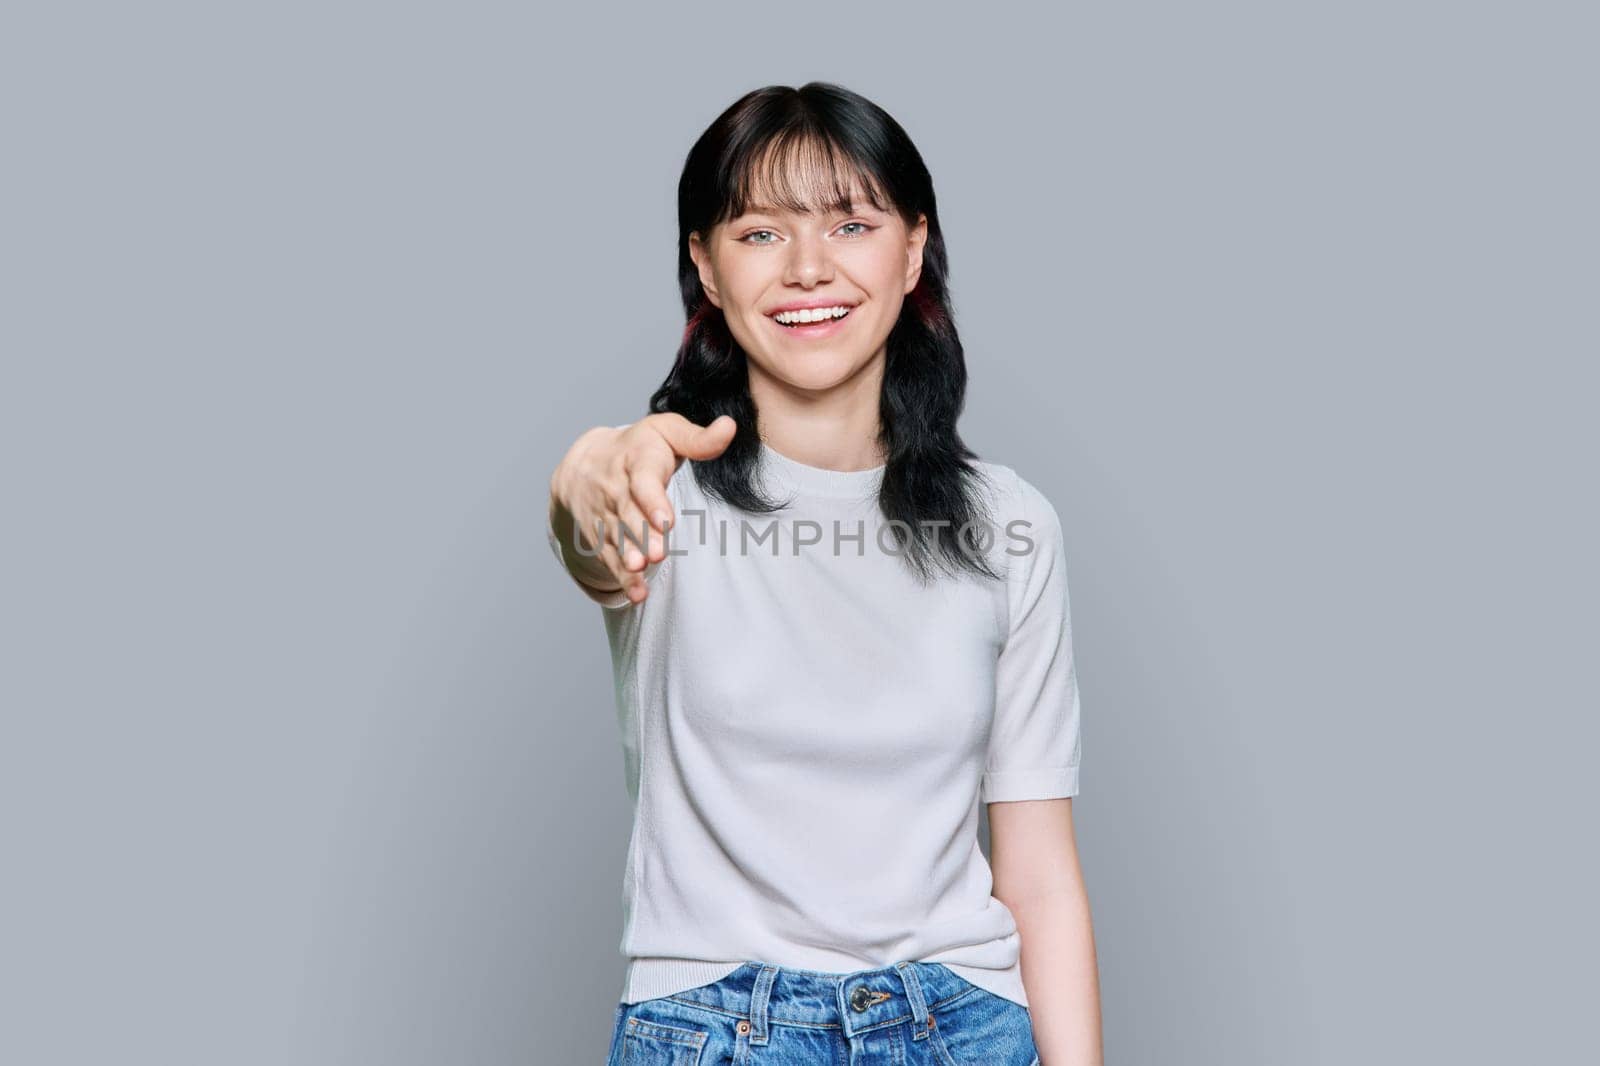 Young teenage female student shaking hands, over grey studio background. Meeting, welcome, greeting, contact, communication, youth concept